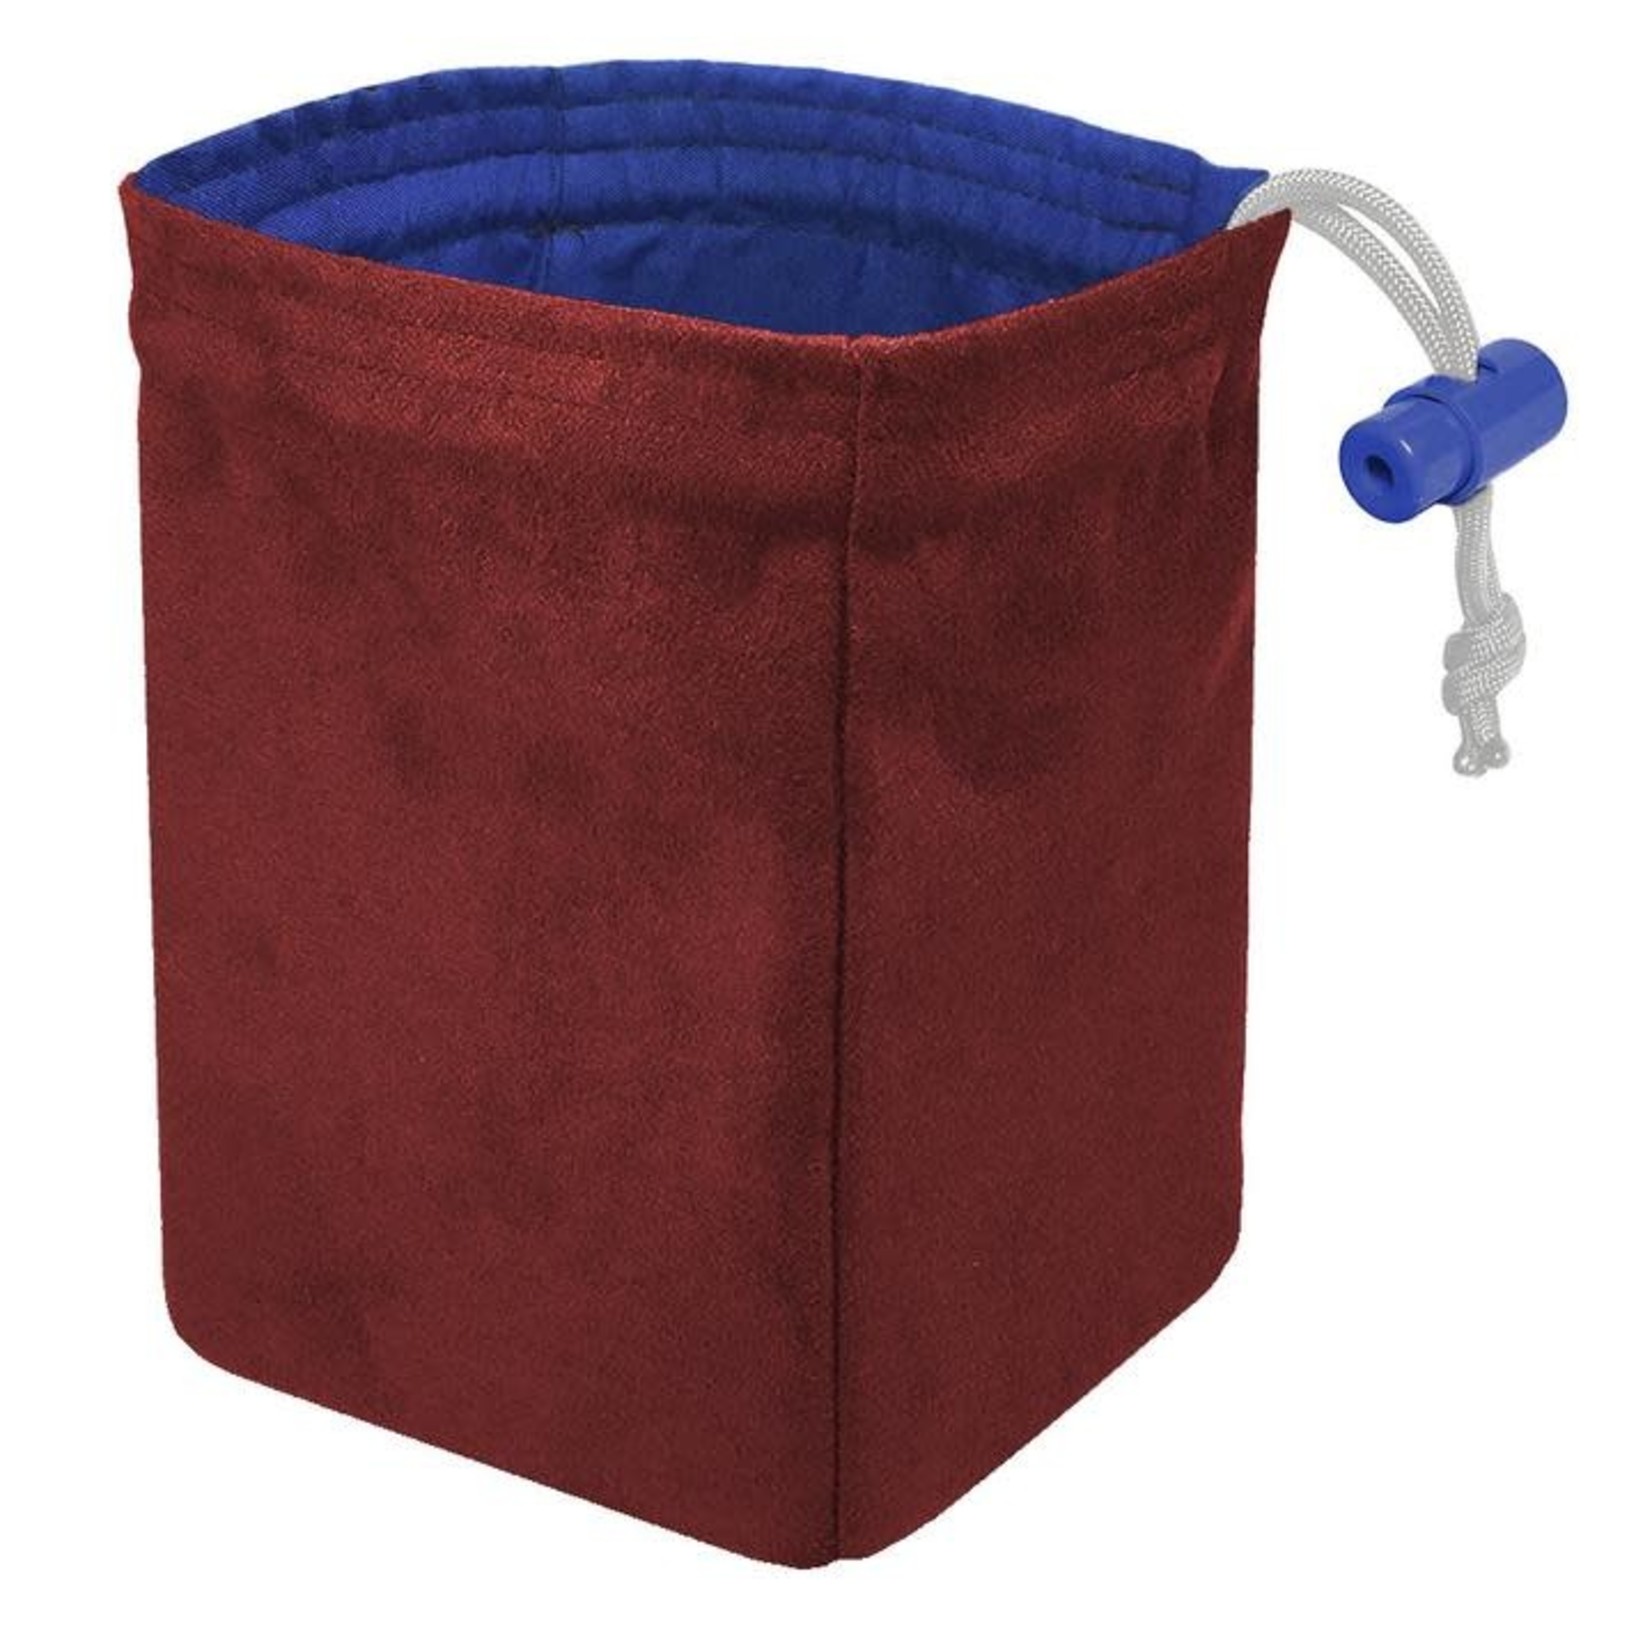 Red King Co. Classic Remix Dice Bag - Red/Blue/White Suede